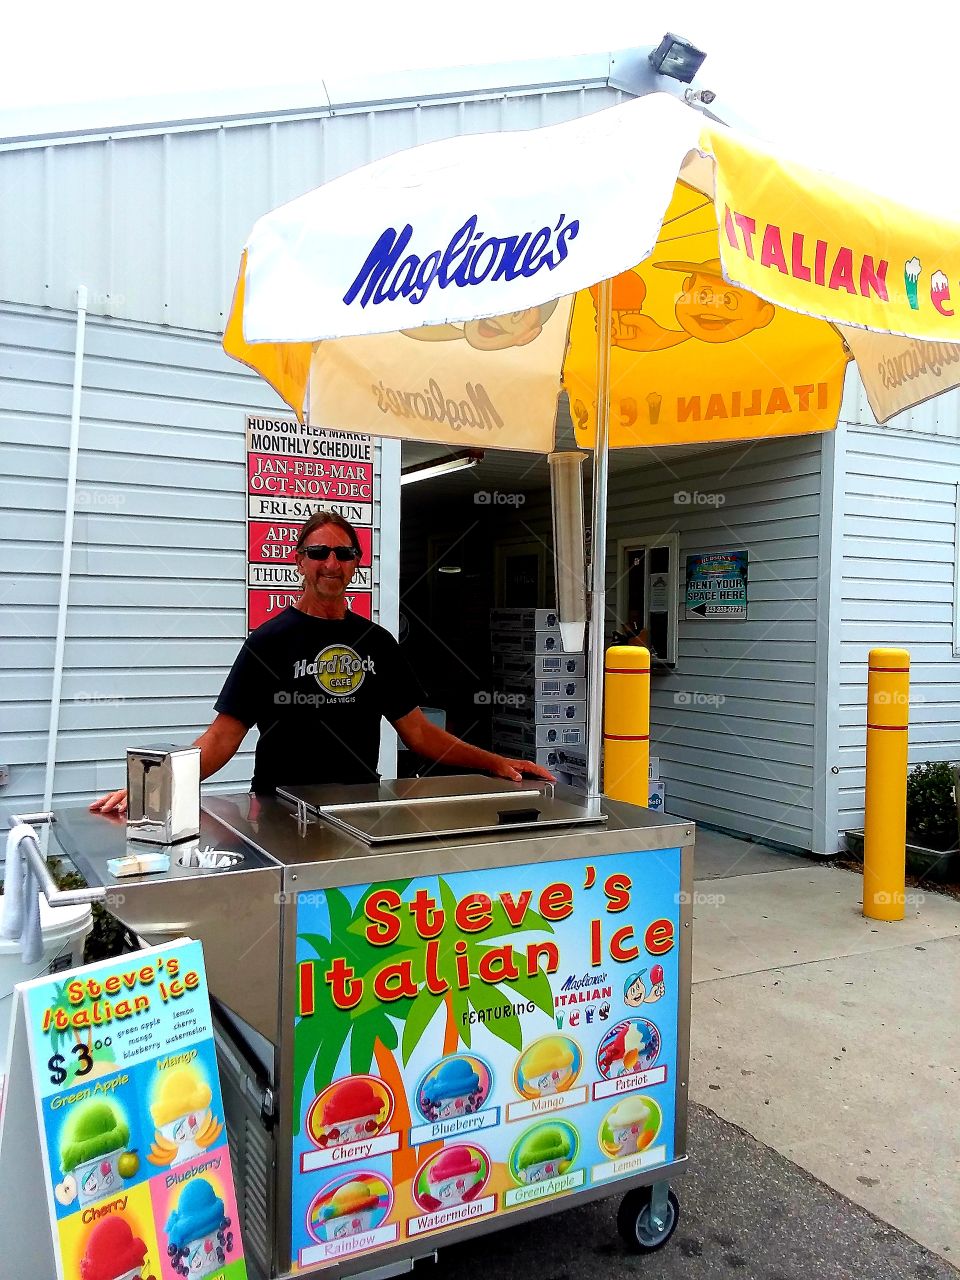 Italian Ice vendor getting ready to do business for the day at the flea market